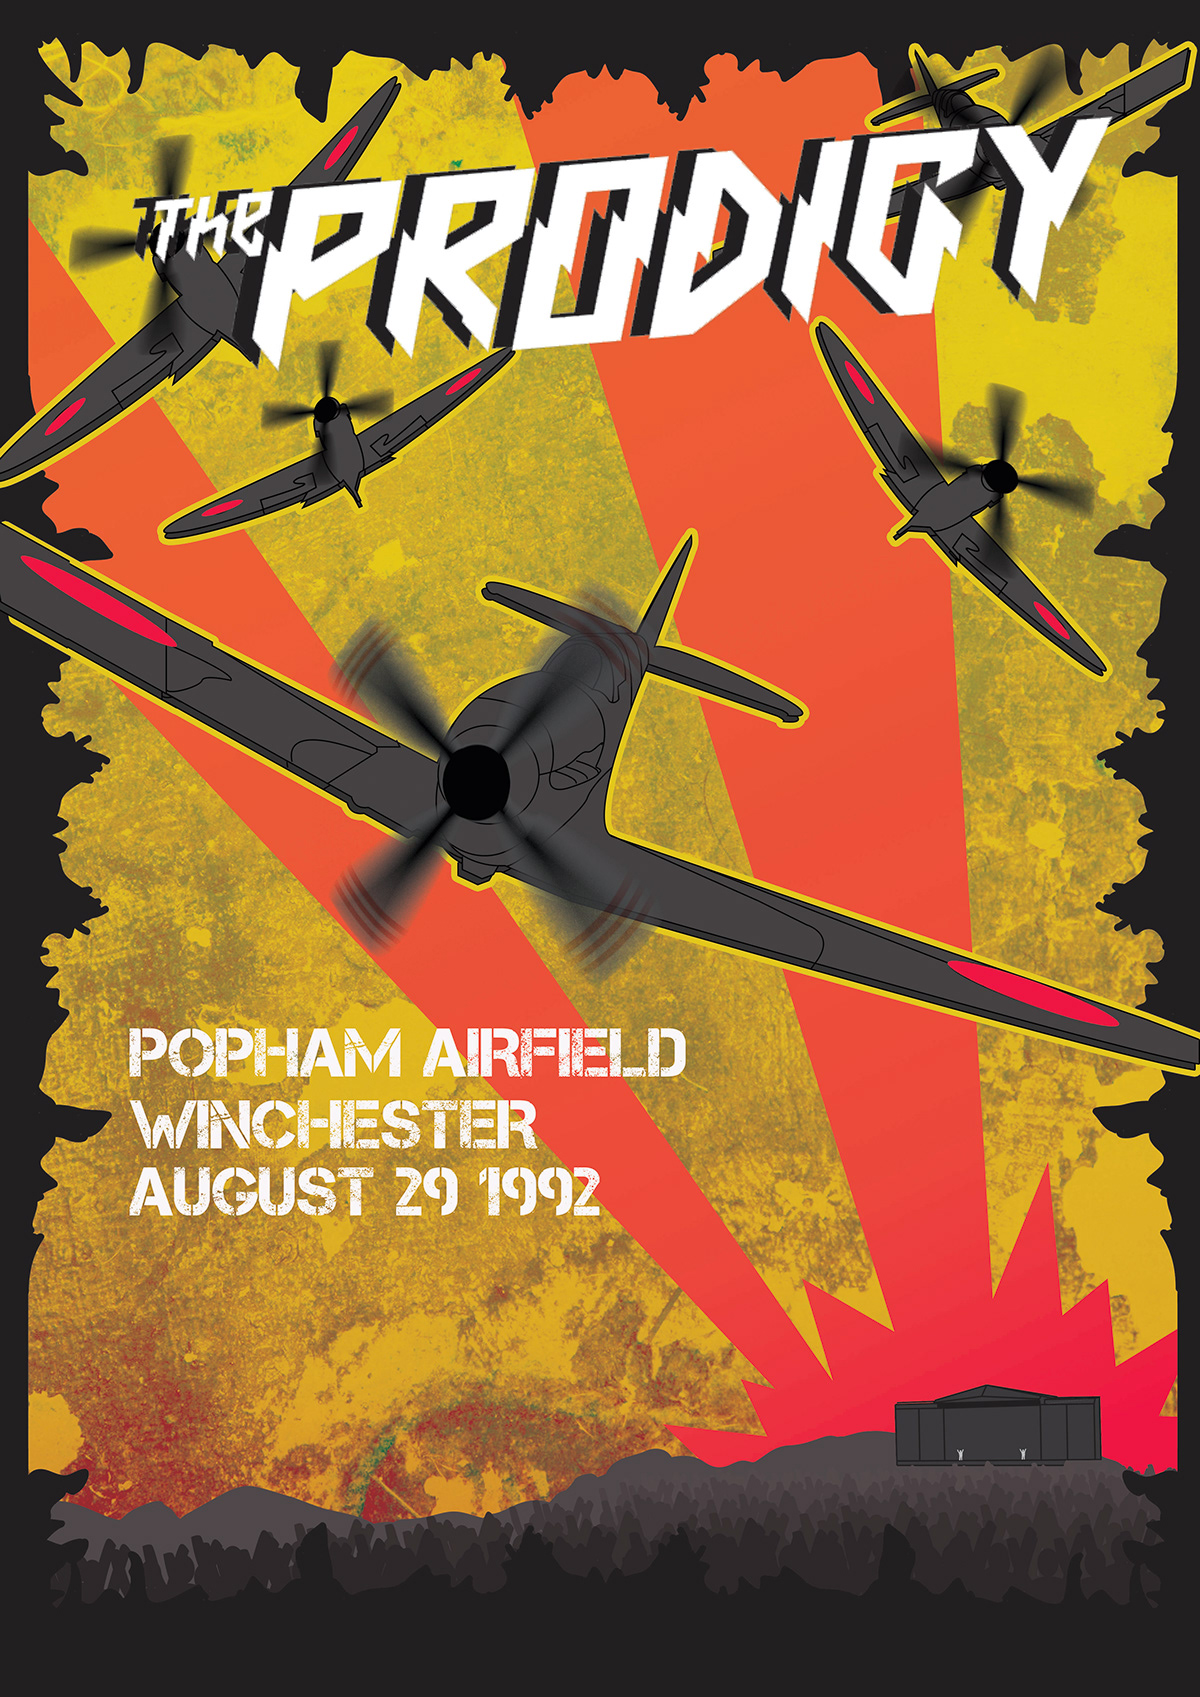 The Prodigy D&AD competition brief poster art